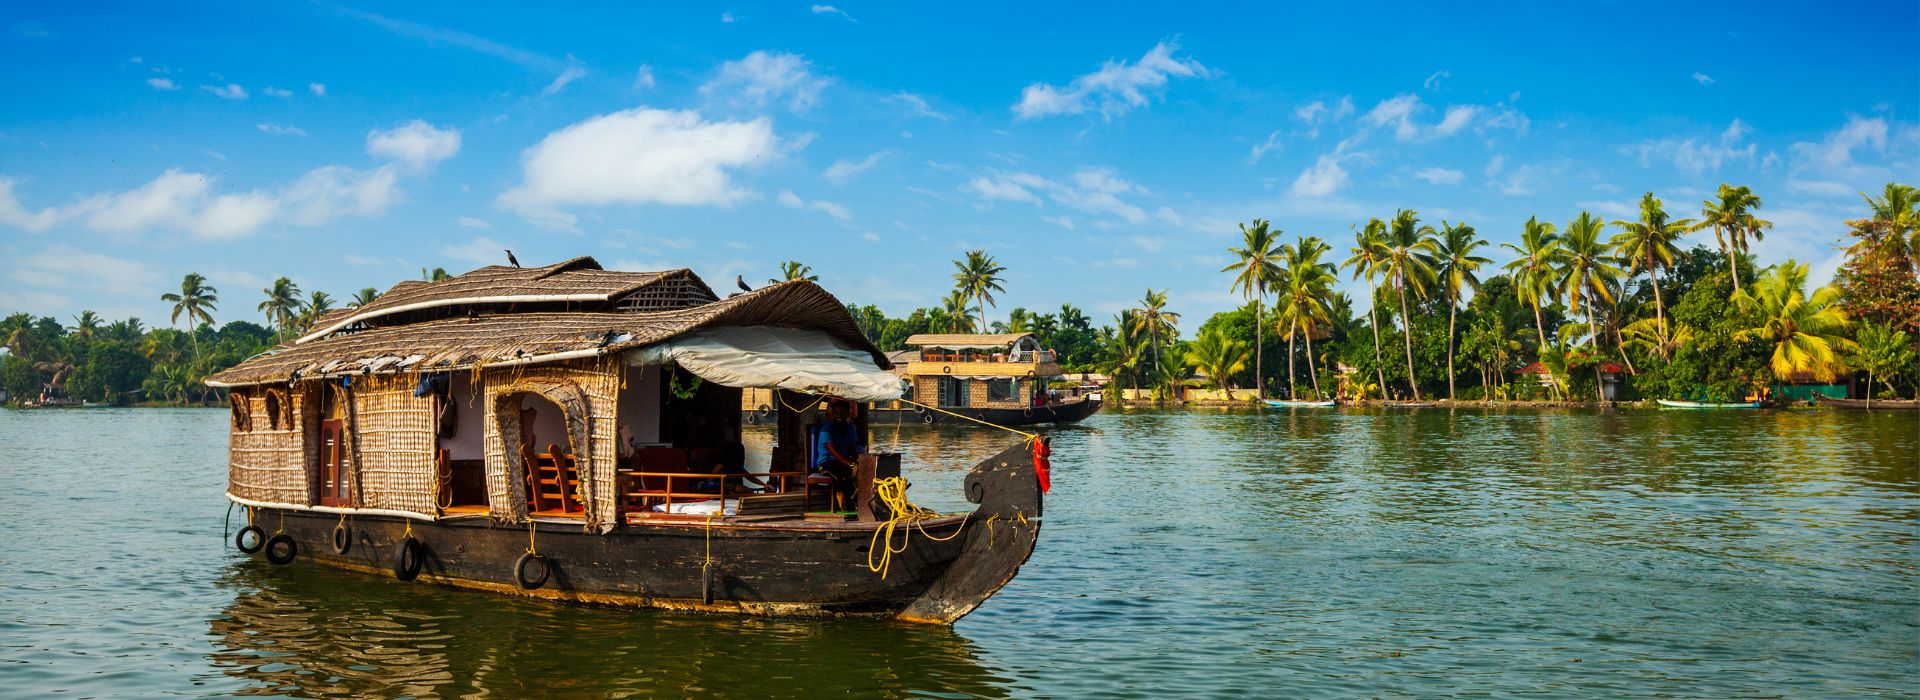 House boats tourism in Kerala